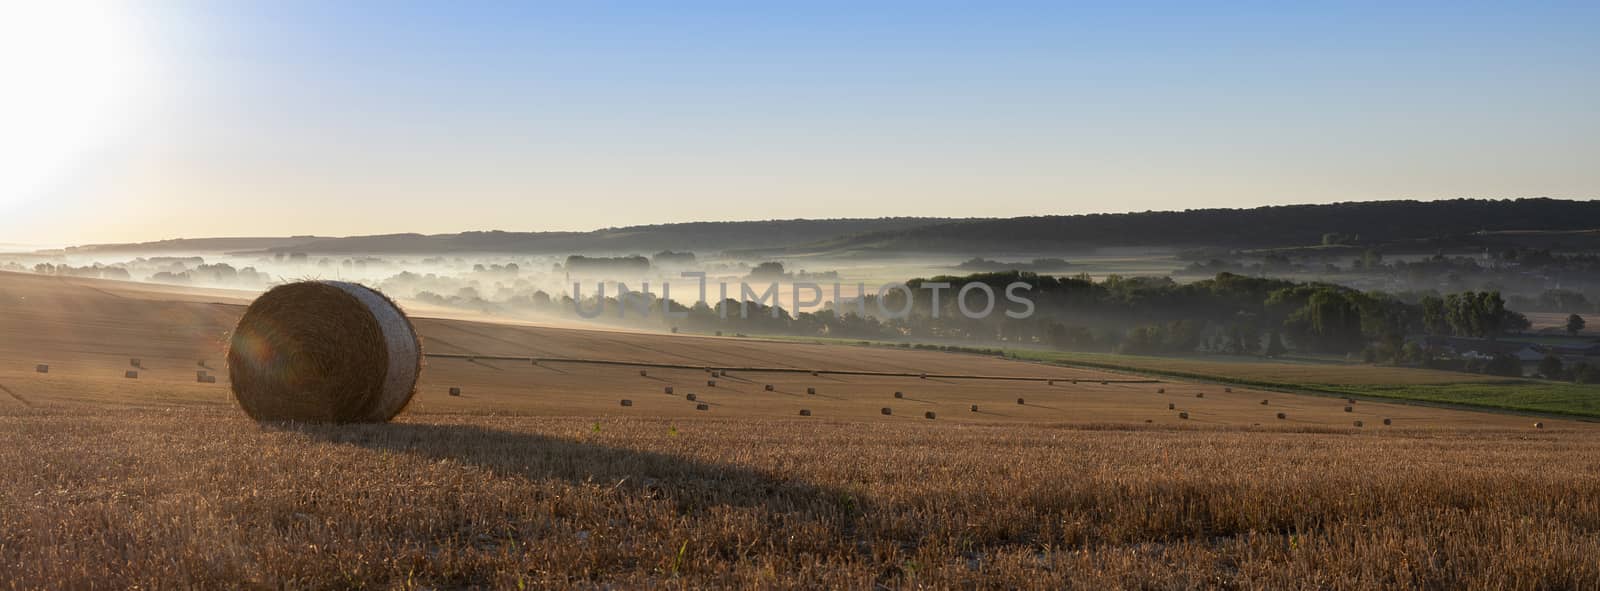 straw bales in early morning light on countryside of french normandy near calais and boulogne by ahavelaar